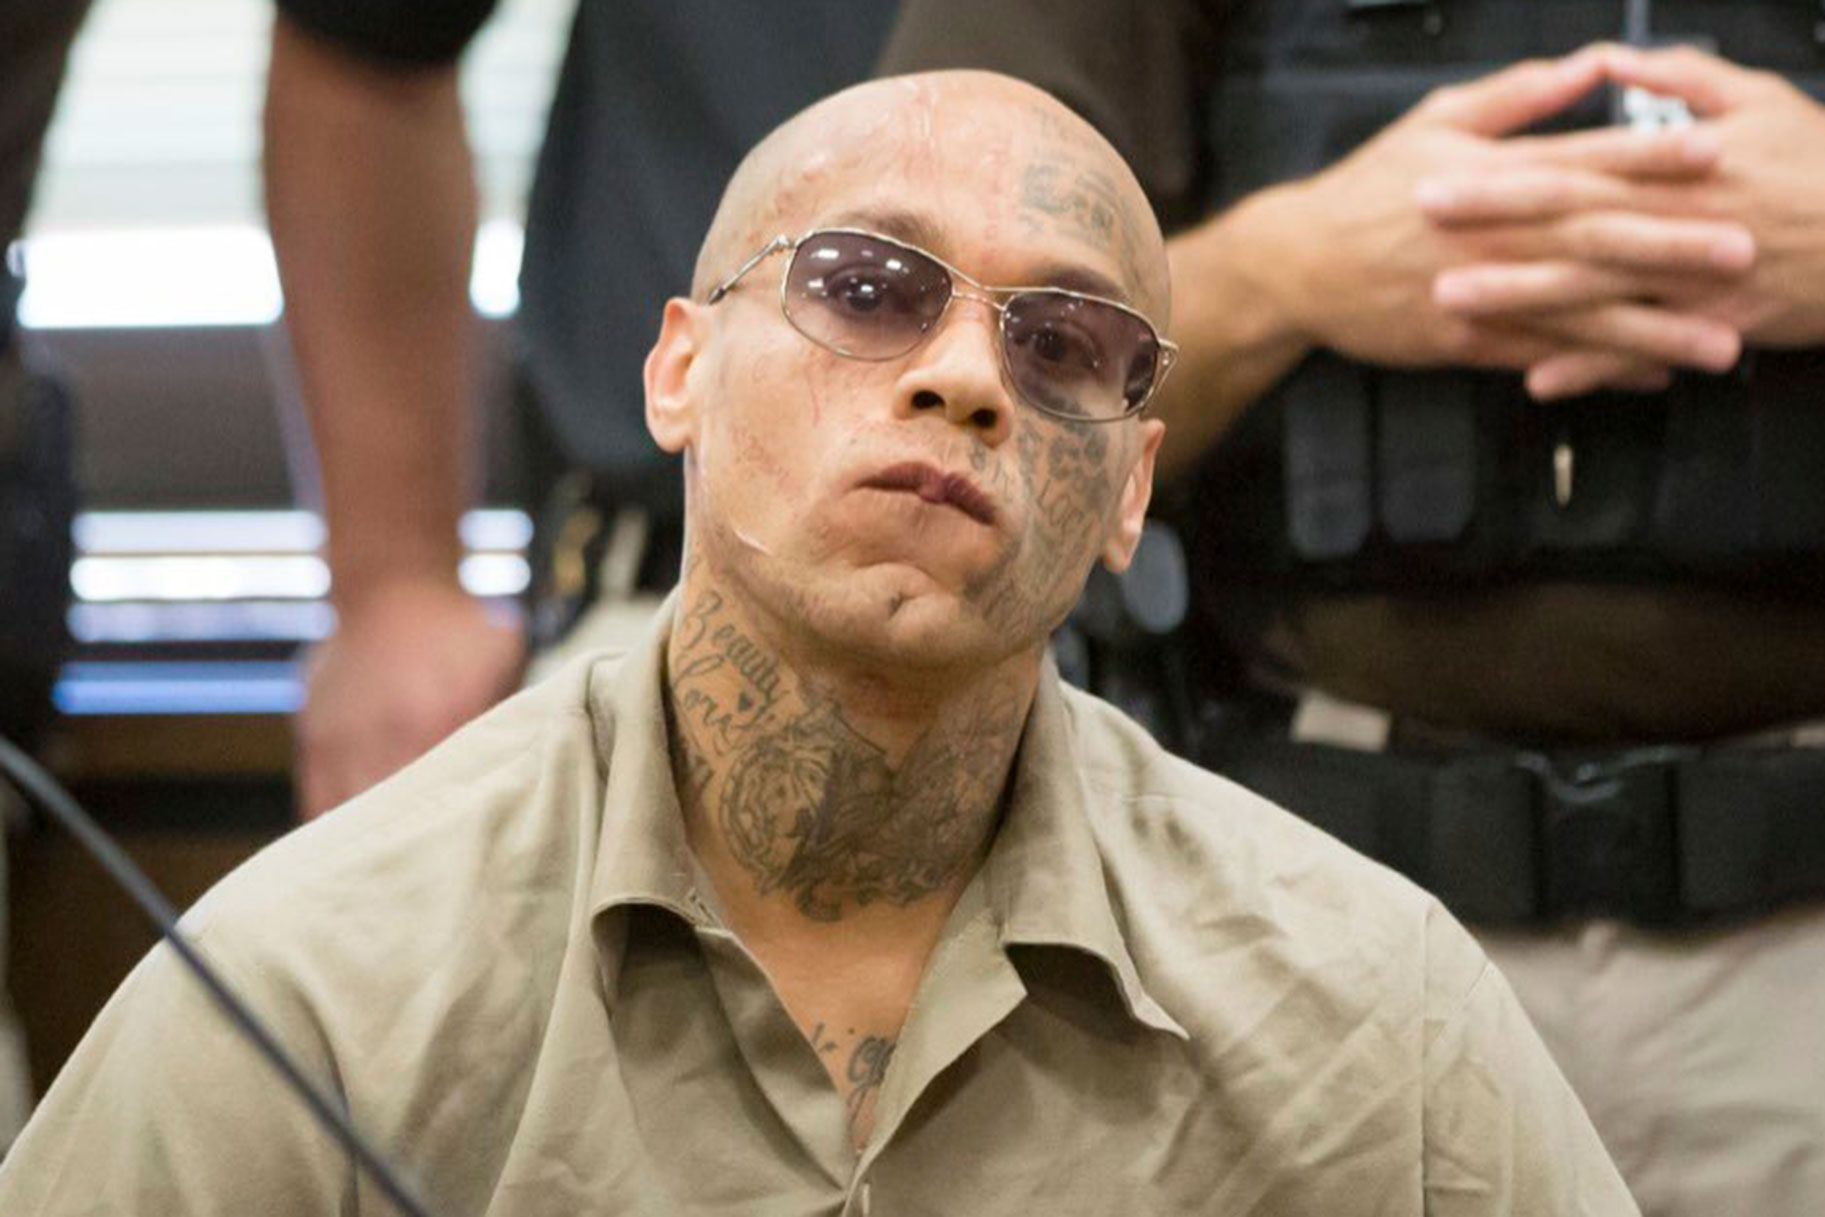 What are your thoughts on "Nikko Jenkins," the most dangerous prisoner in the world?